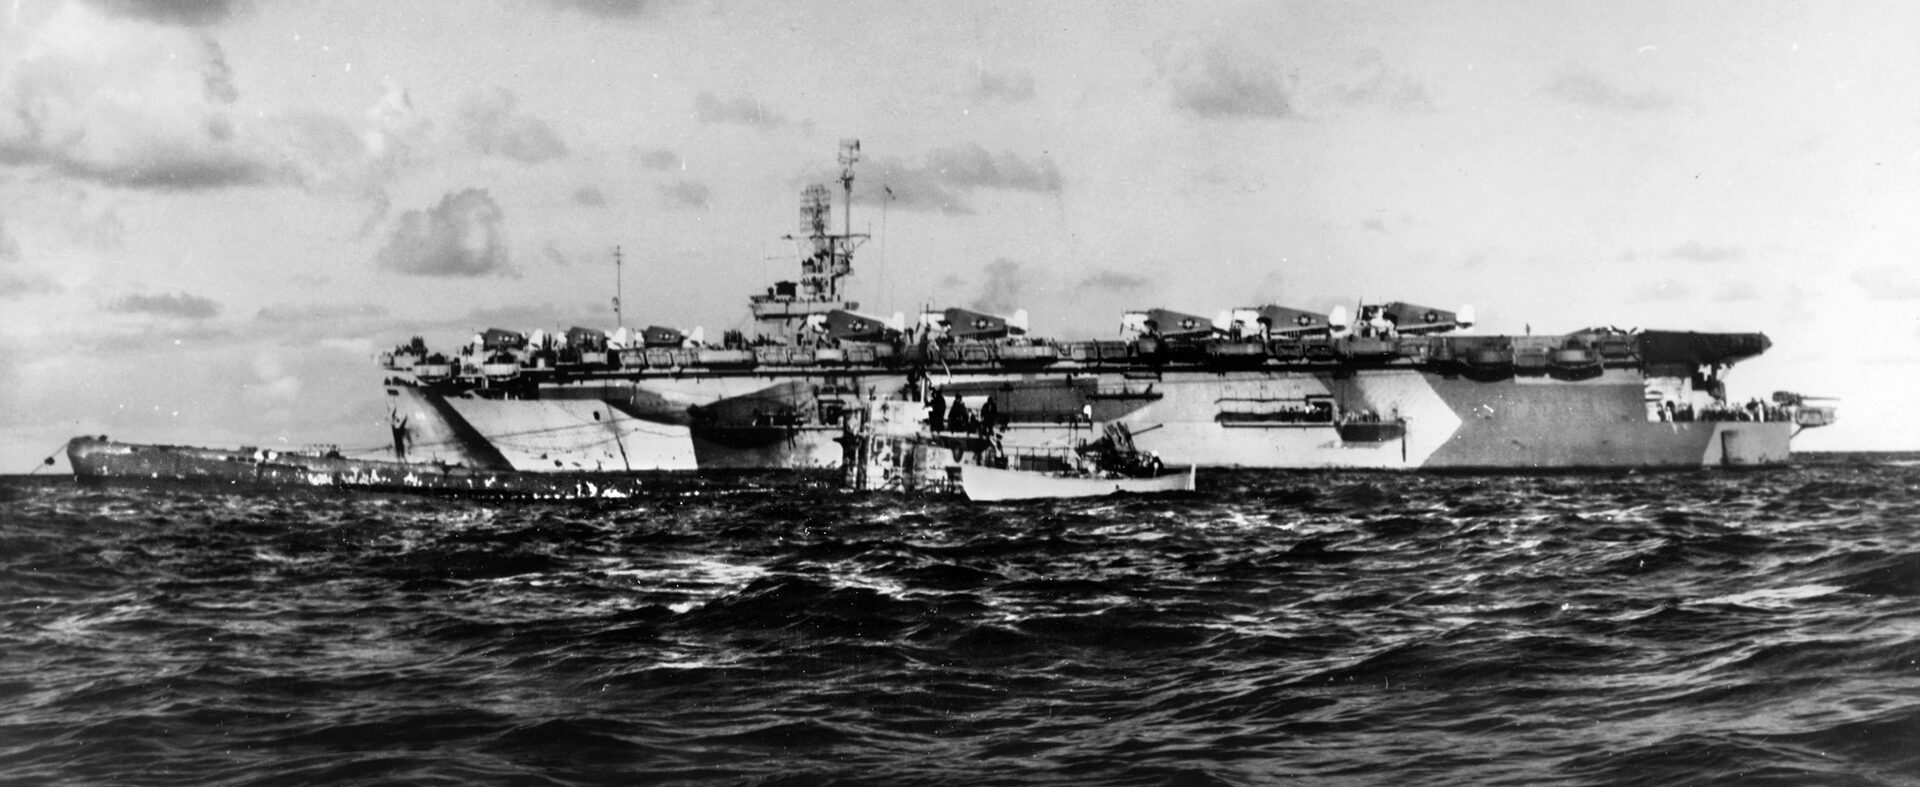 After the tow line has been successfully rigged and U-505 secured from sinking on June 4, 1944, this photo was taken depicting the captured German submarine and the escort carrier USS Guadalcanal. A small boat that carried the boarding party to U-505 remains close to the submarine.